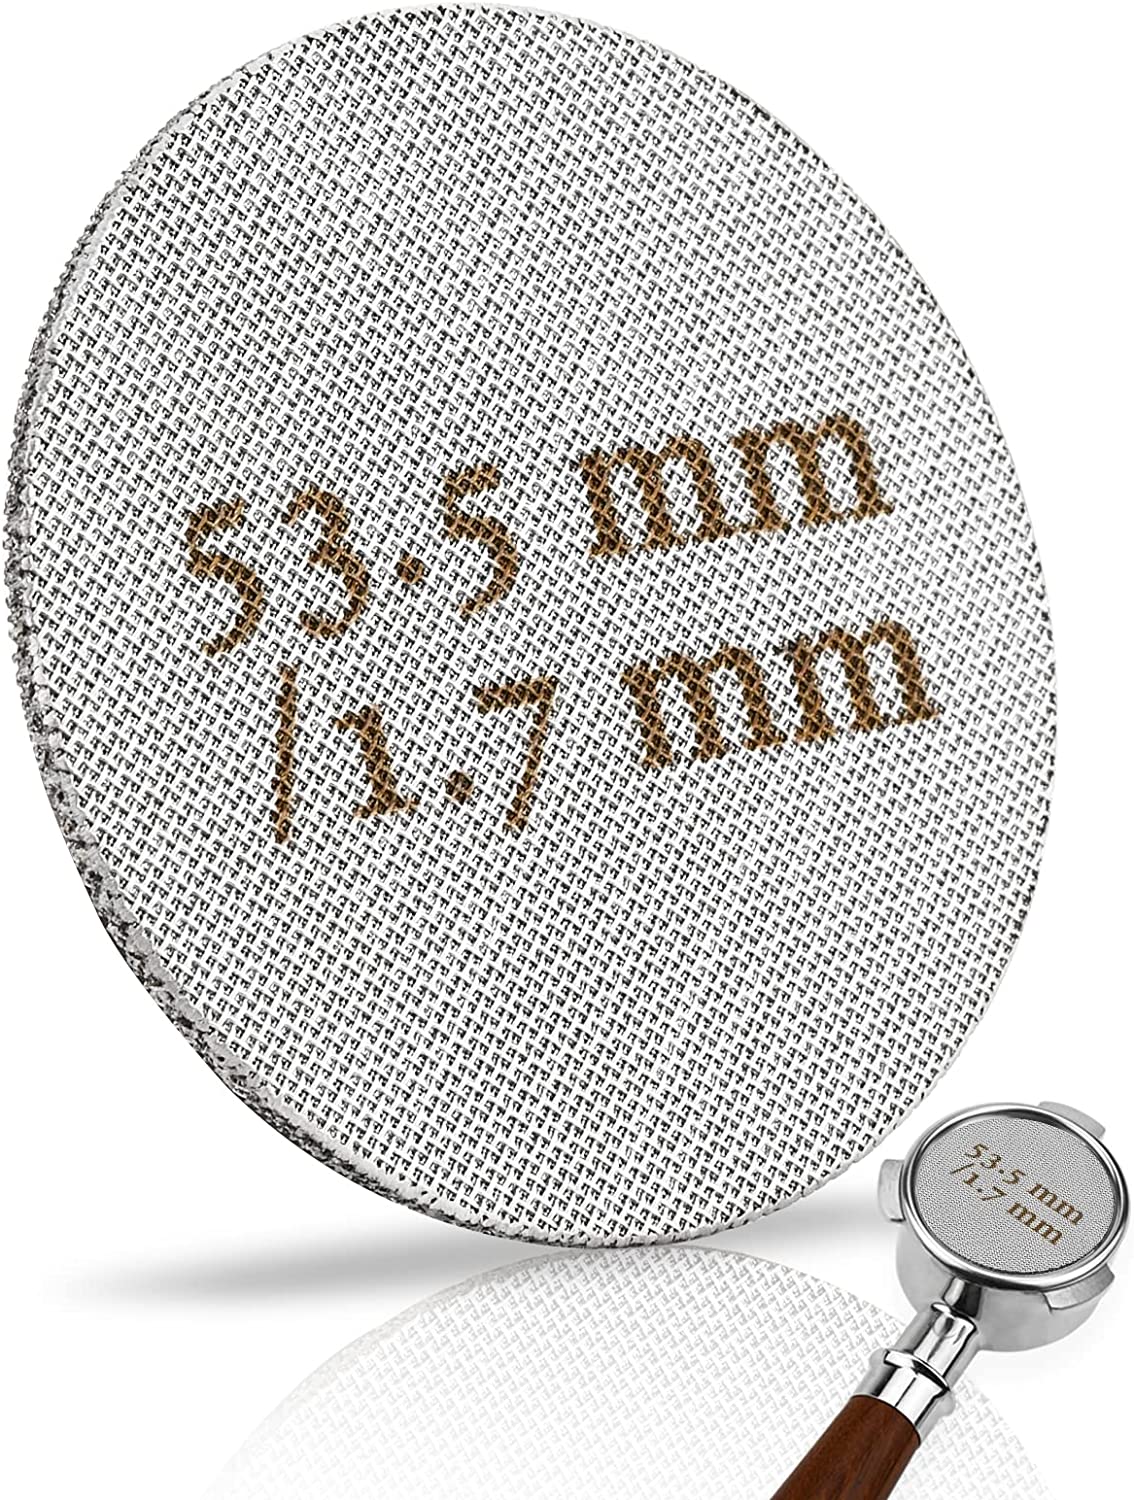 Puck Strainer, 53.5 mm Puck Screen, Sintered Coffee Filter, Coffee Filter Plate for Espresso Filter Holder Accessories, 1.7 mm Thickness, 150 μm, Stainless Steel, 316 Reusable, Rustproof